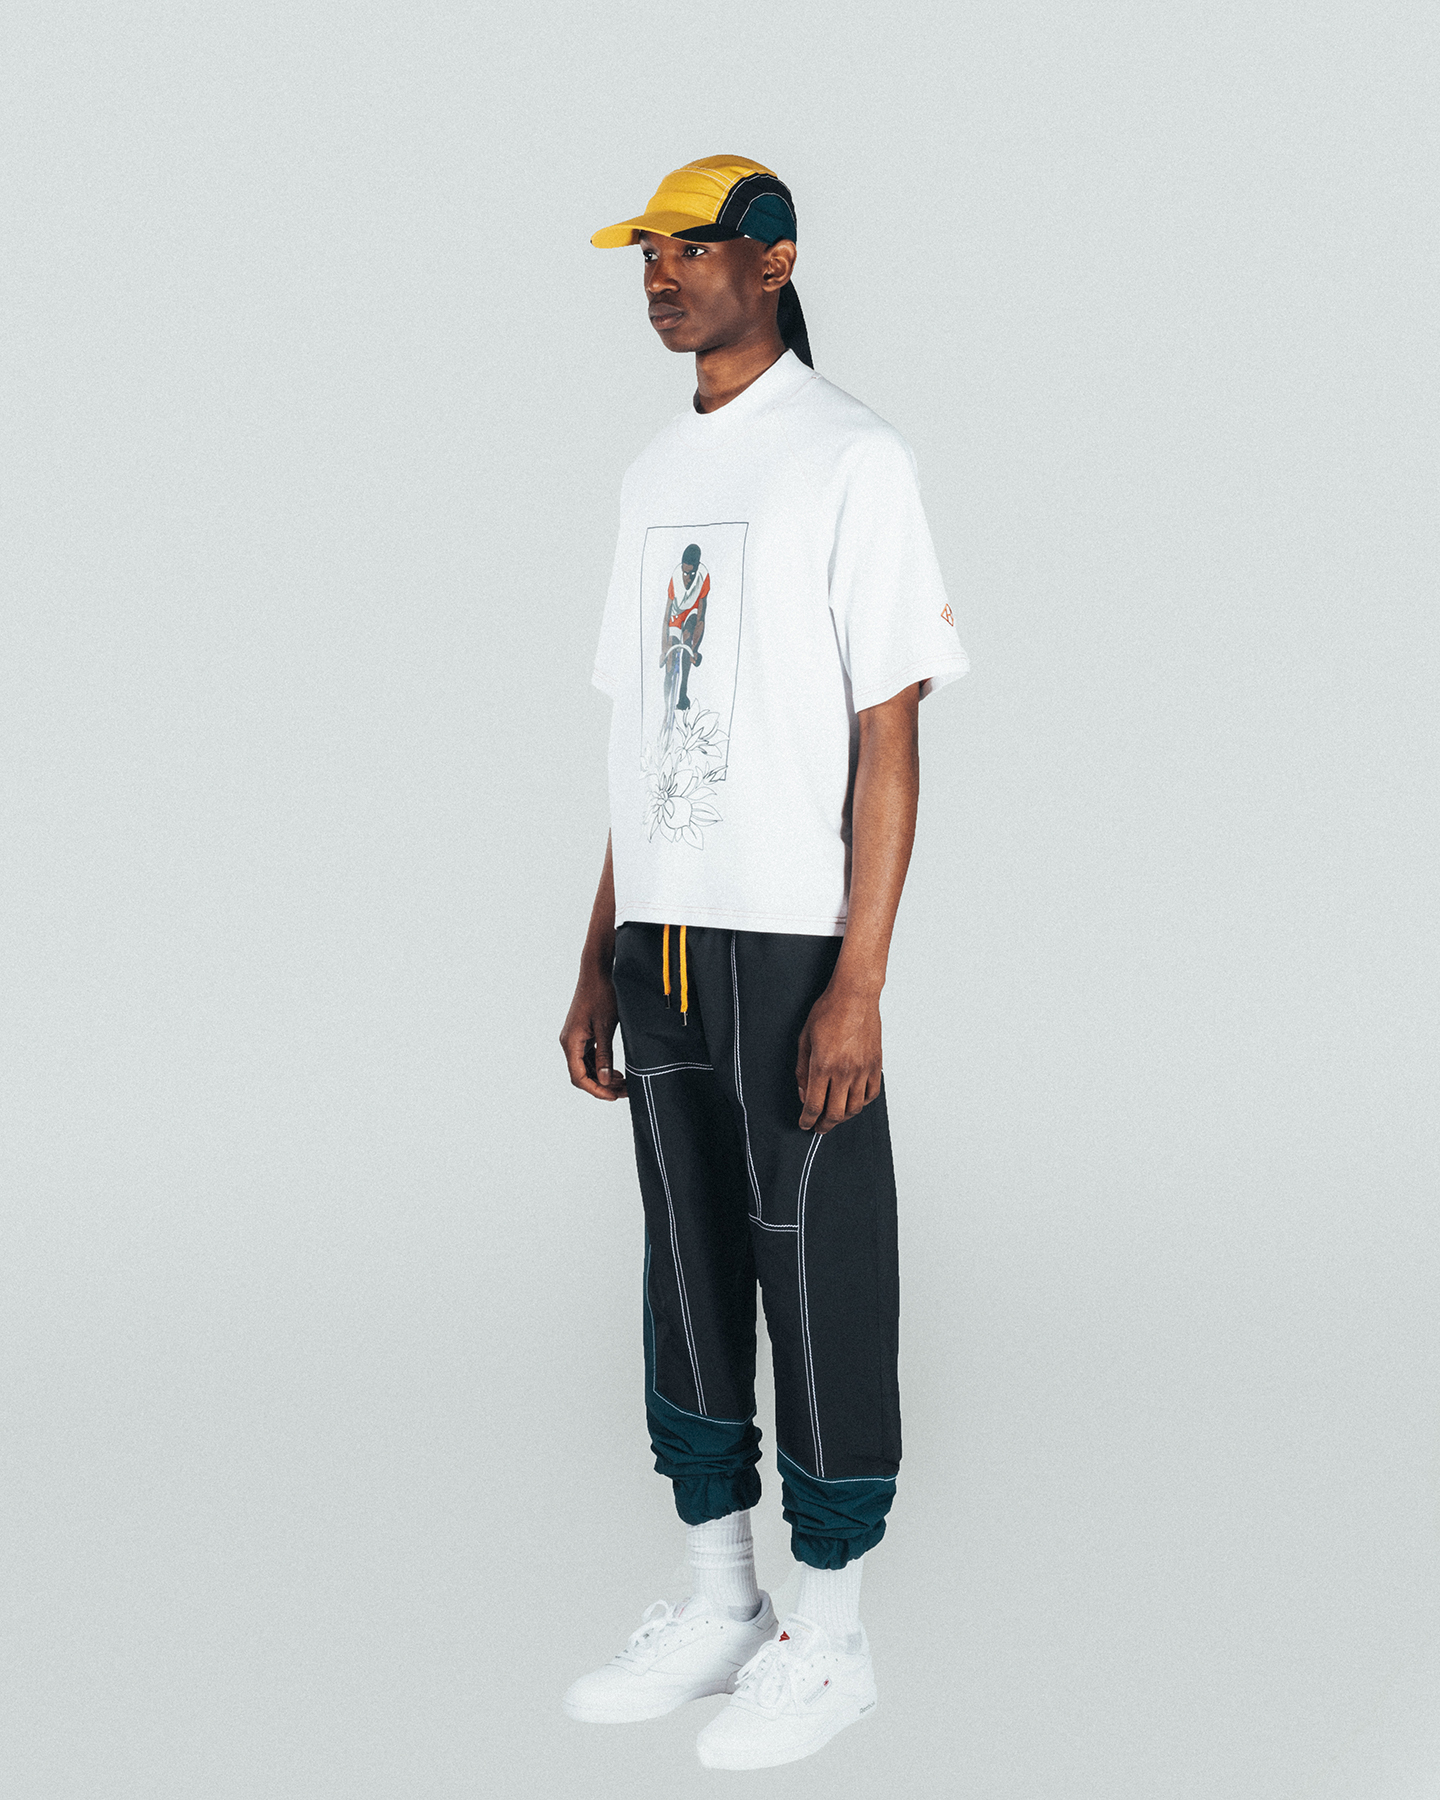 Pyer Moss Designs First-ever Hennessy Apparel Collection - The Impression